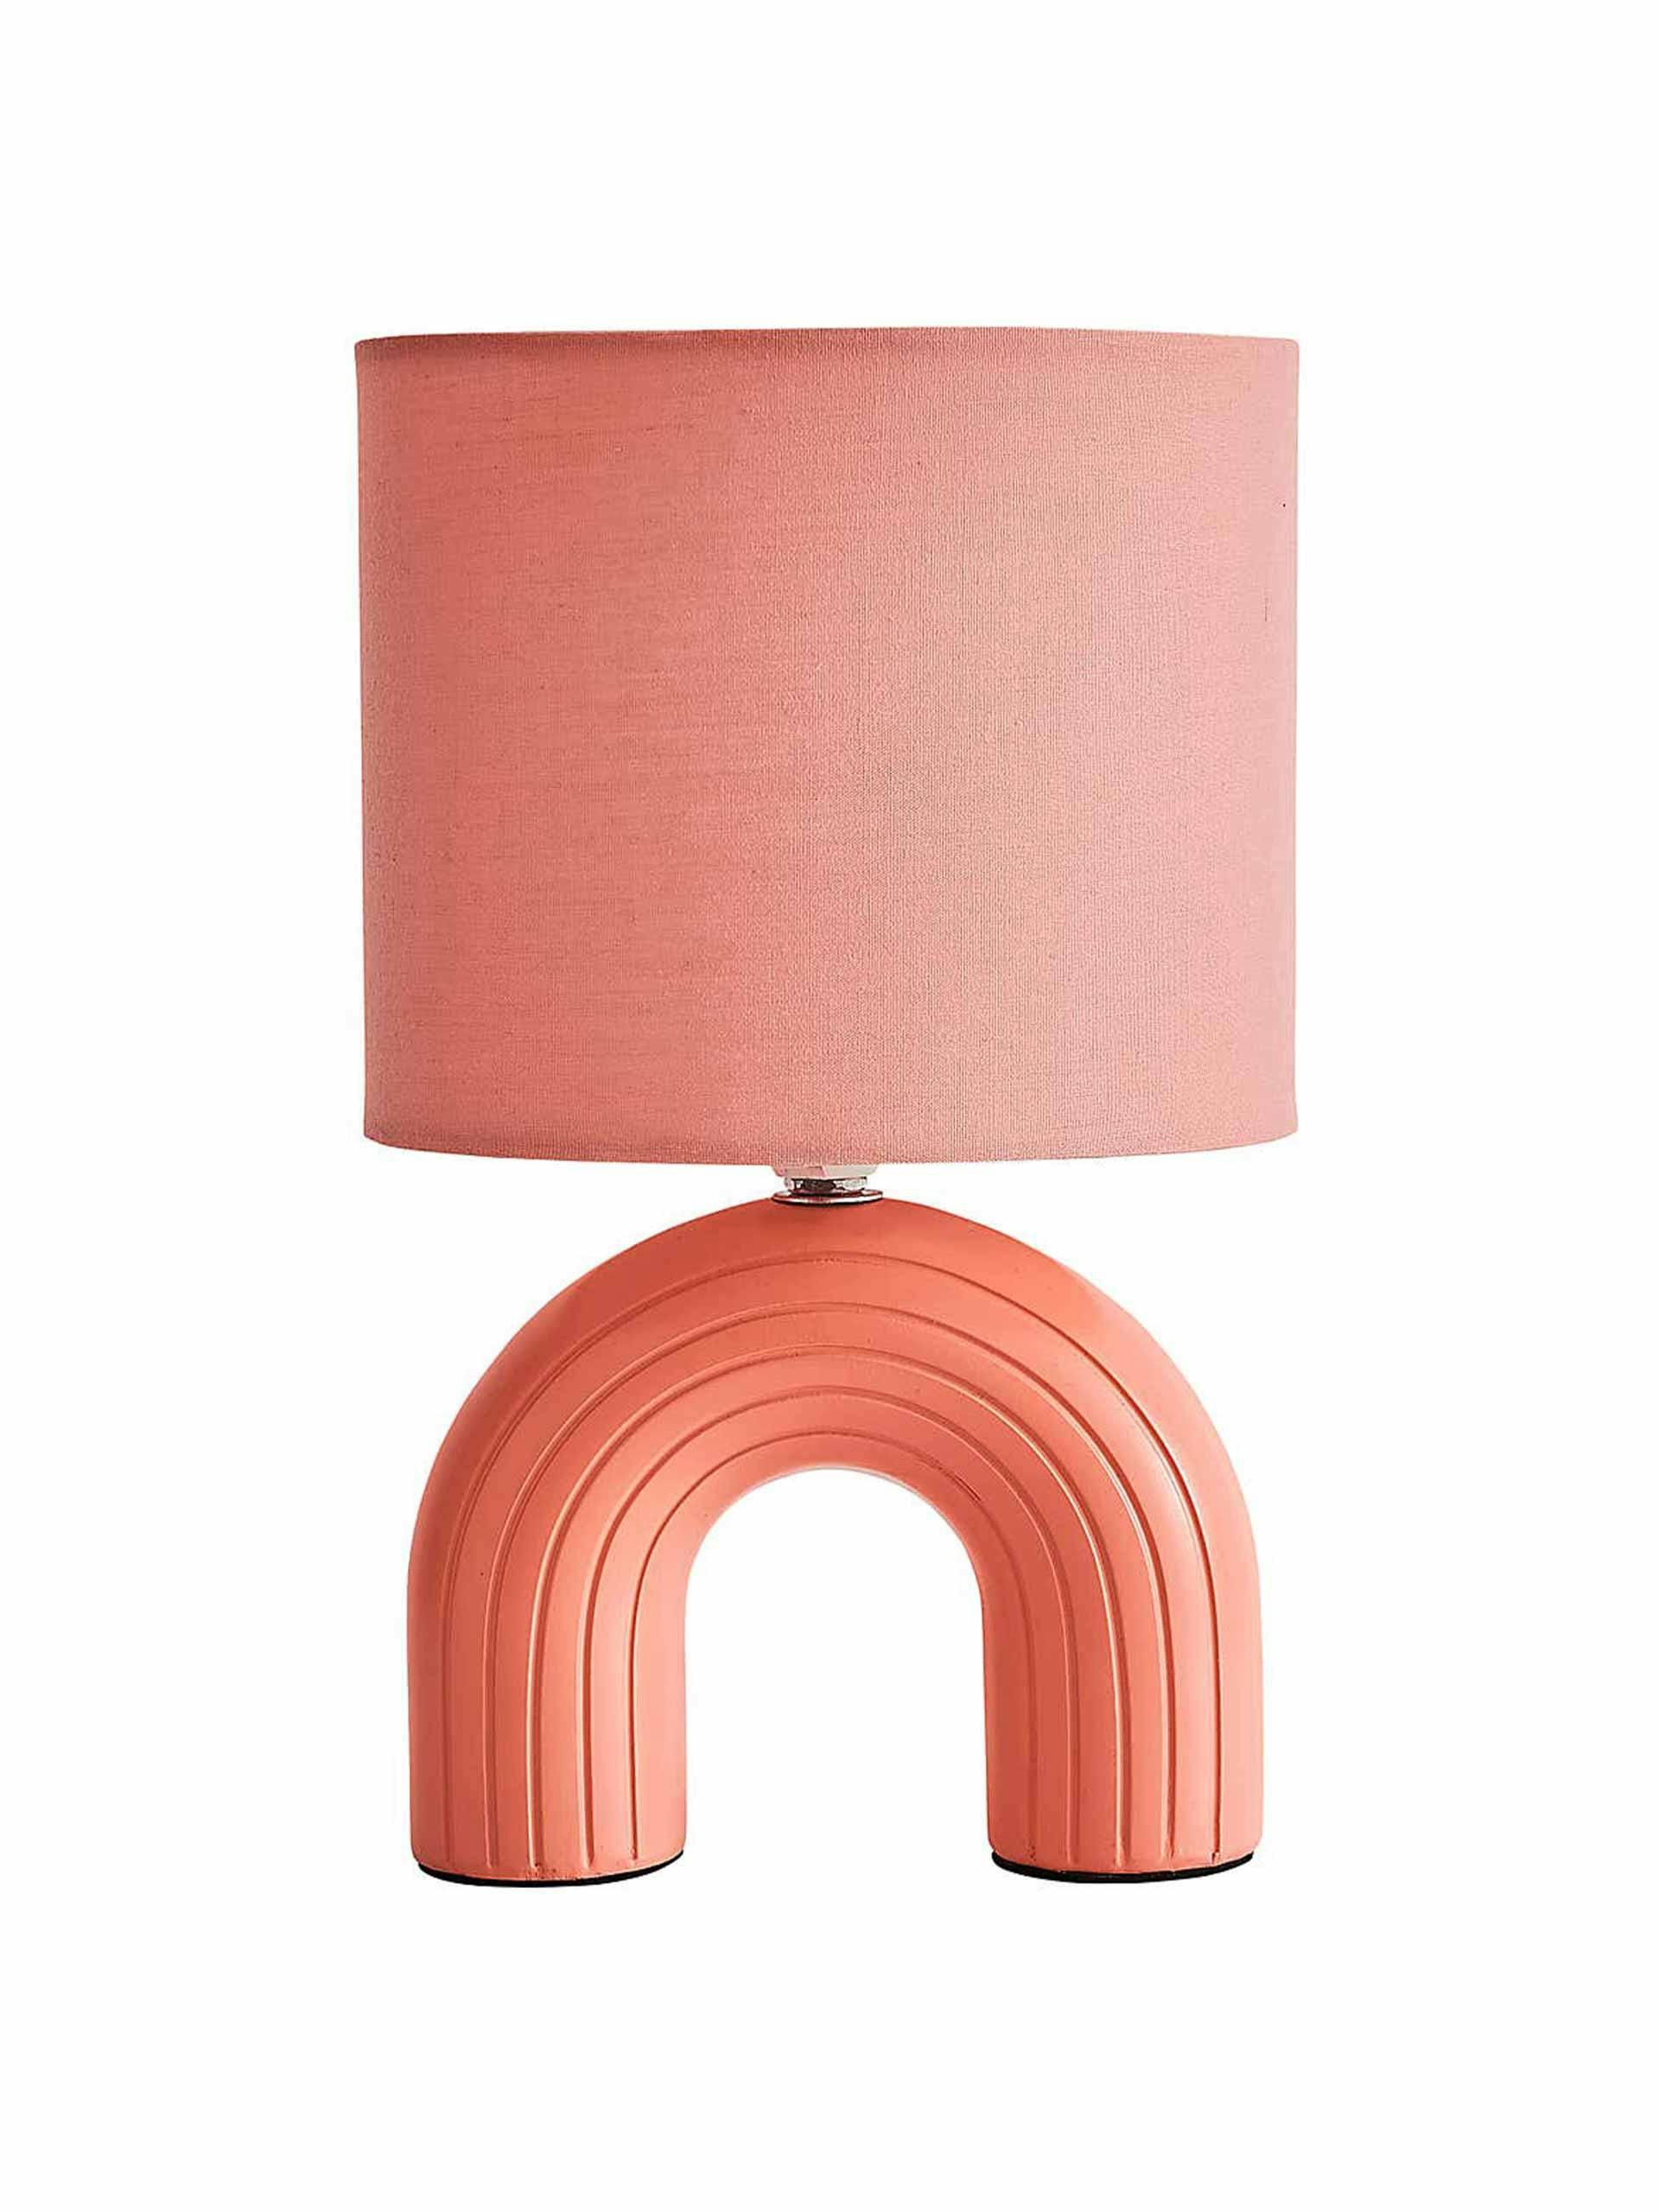 Rumey integrated LED table lamp